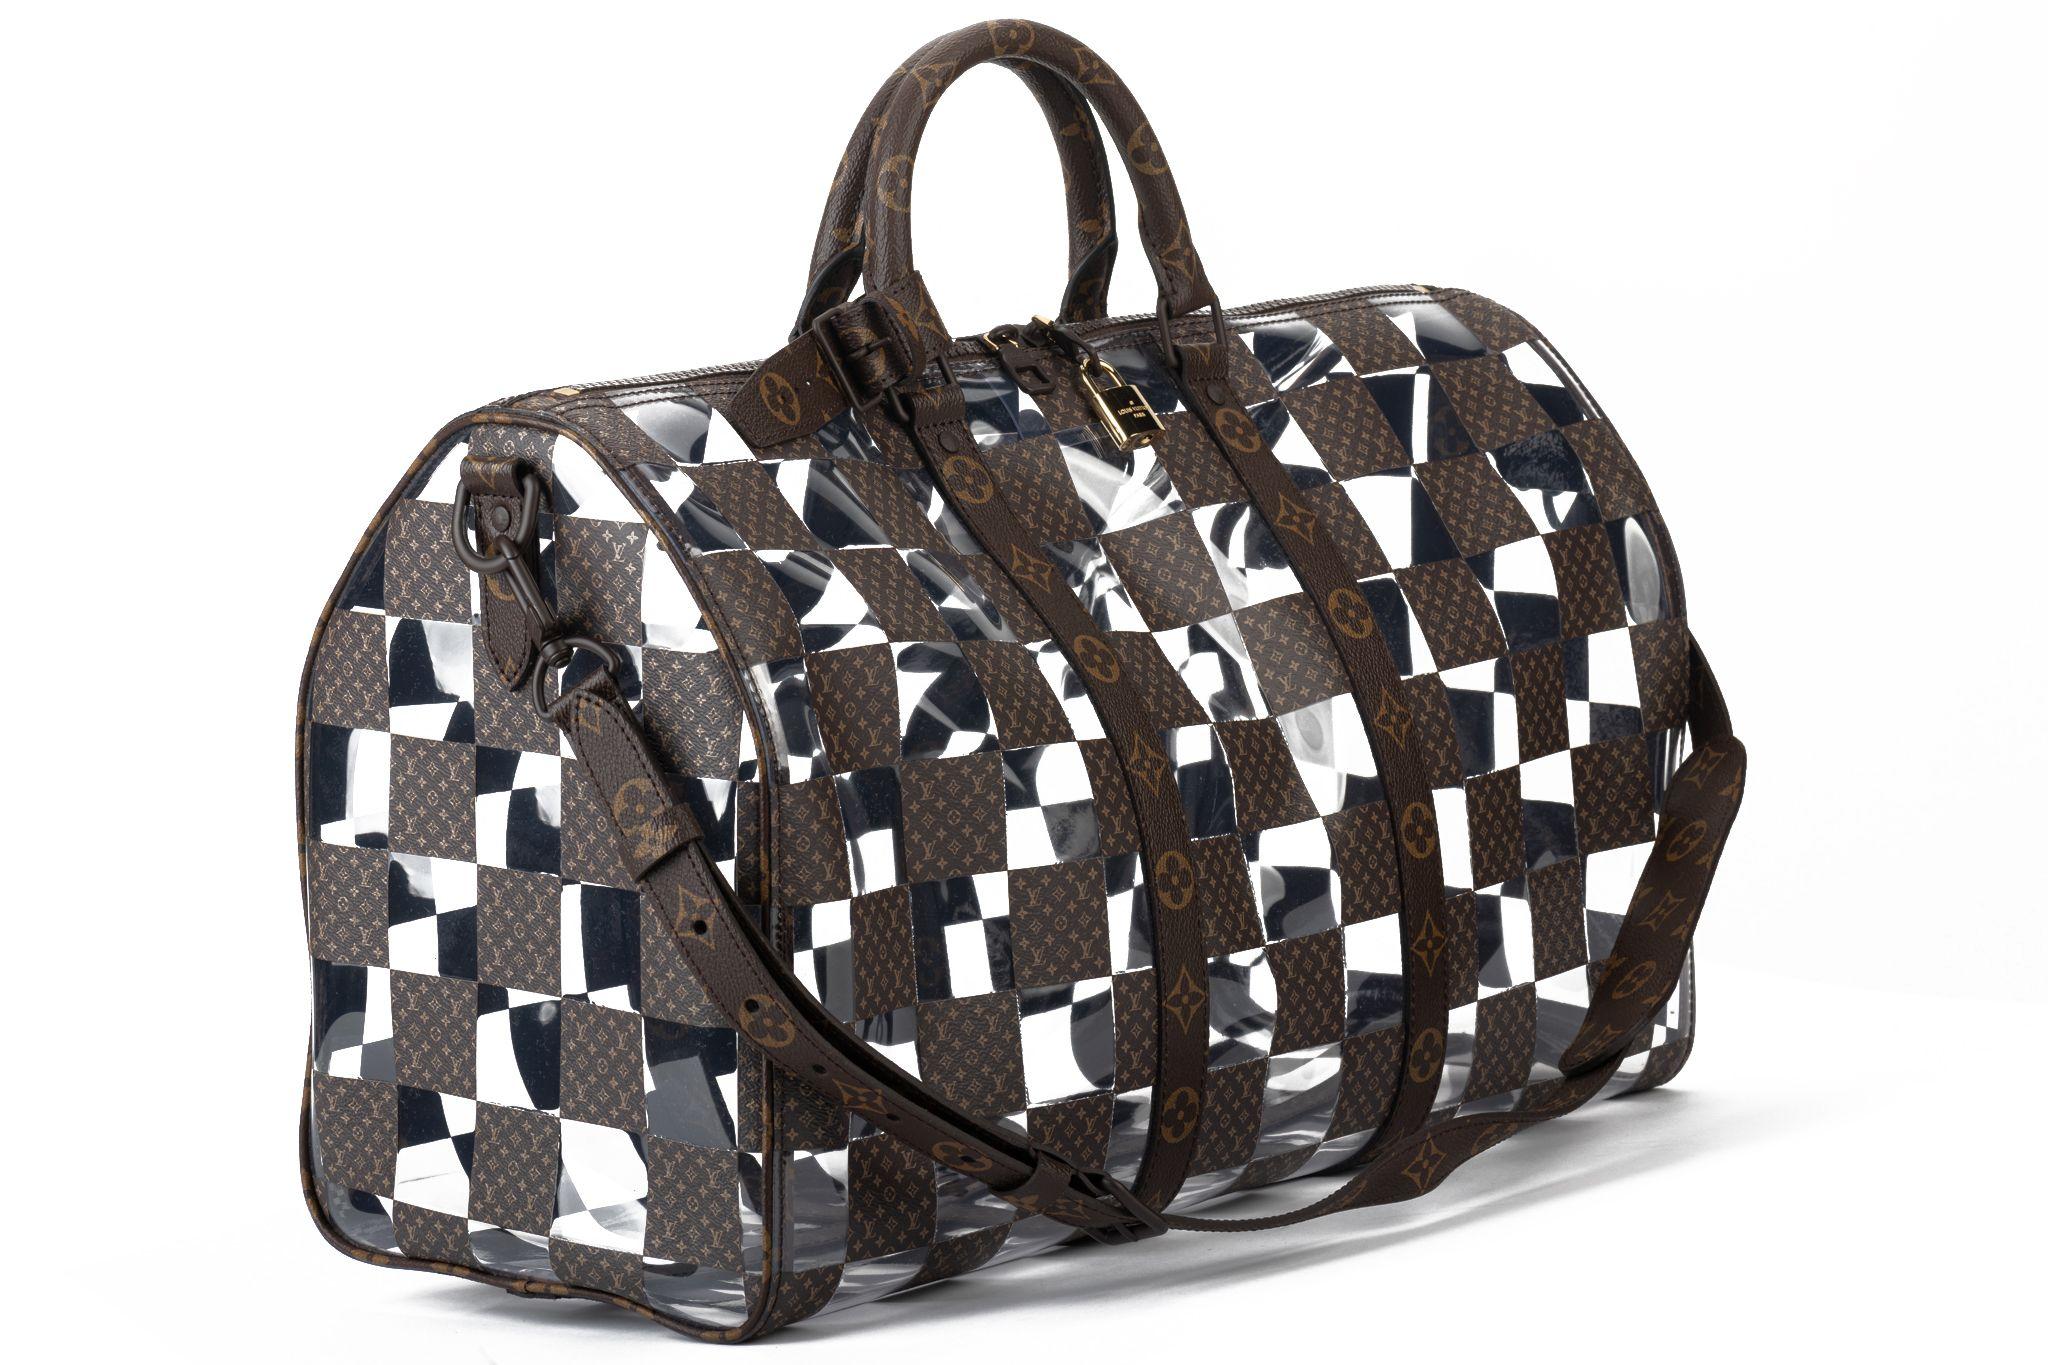 Louis Vuitton Fall Winter 2022 designed by Virgil Abloh, monogram chess keep all 50. Handle drop 4.5”. Shoulder strap drop 14”, adjustable. Comes with lock and 2 keys, name tag and additional bag holder. Original dust cover and box.